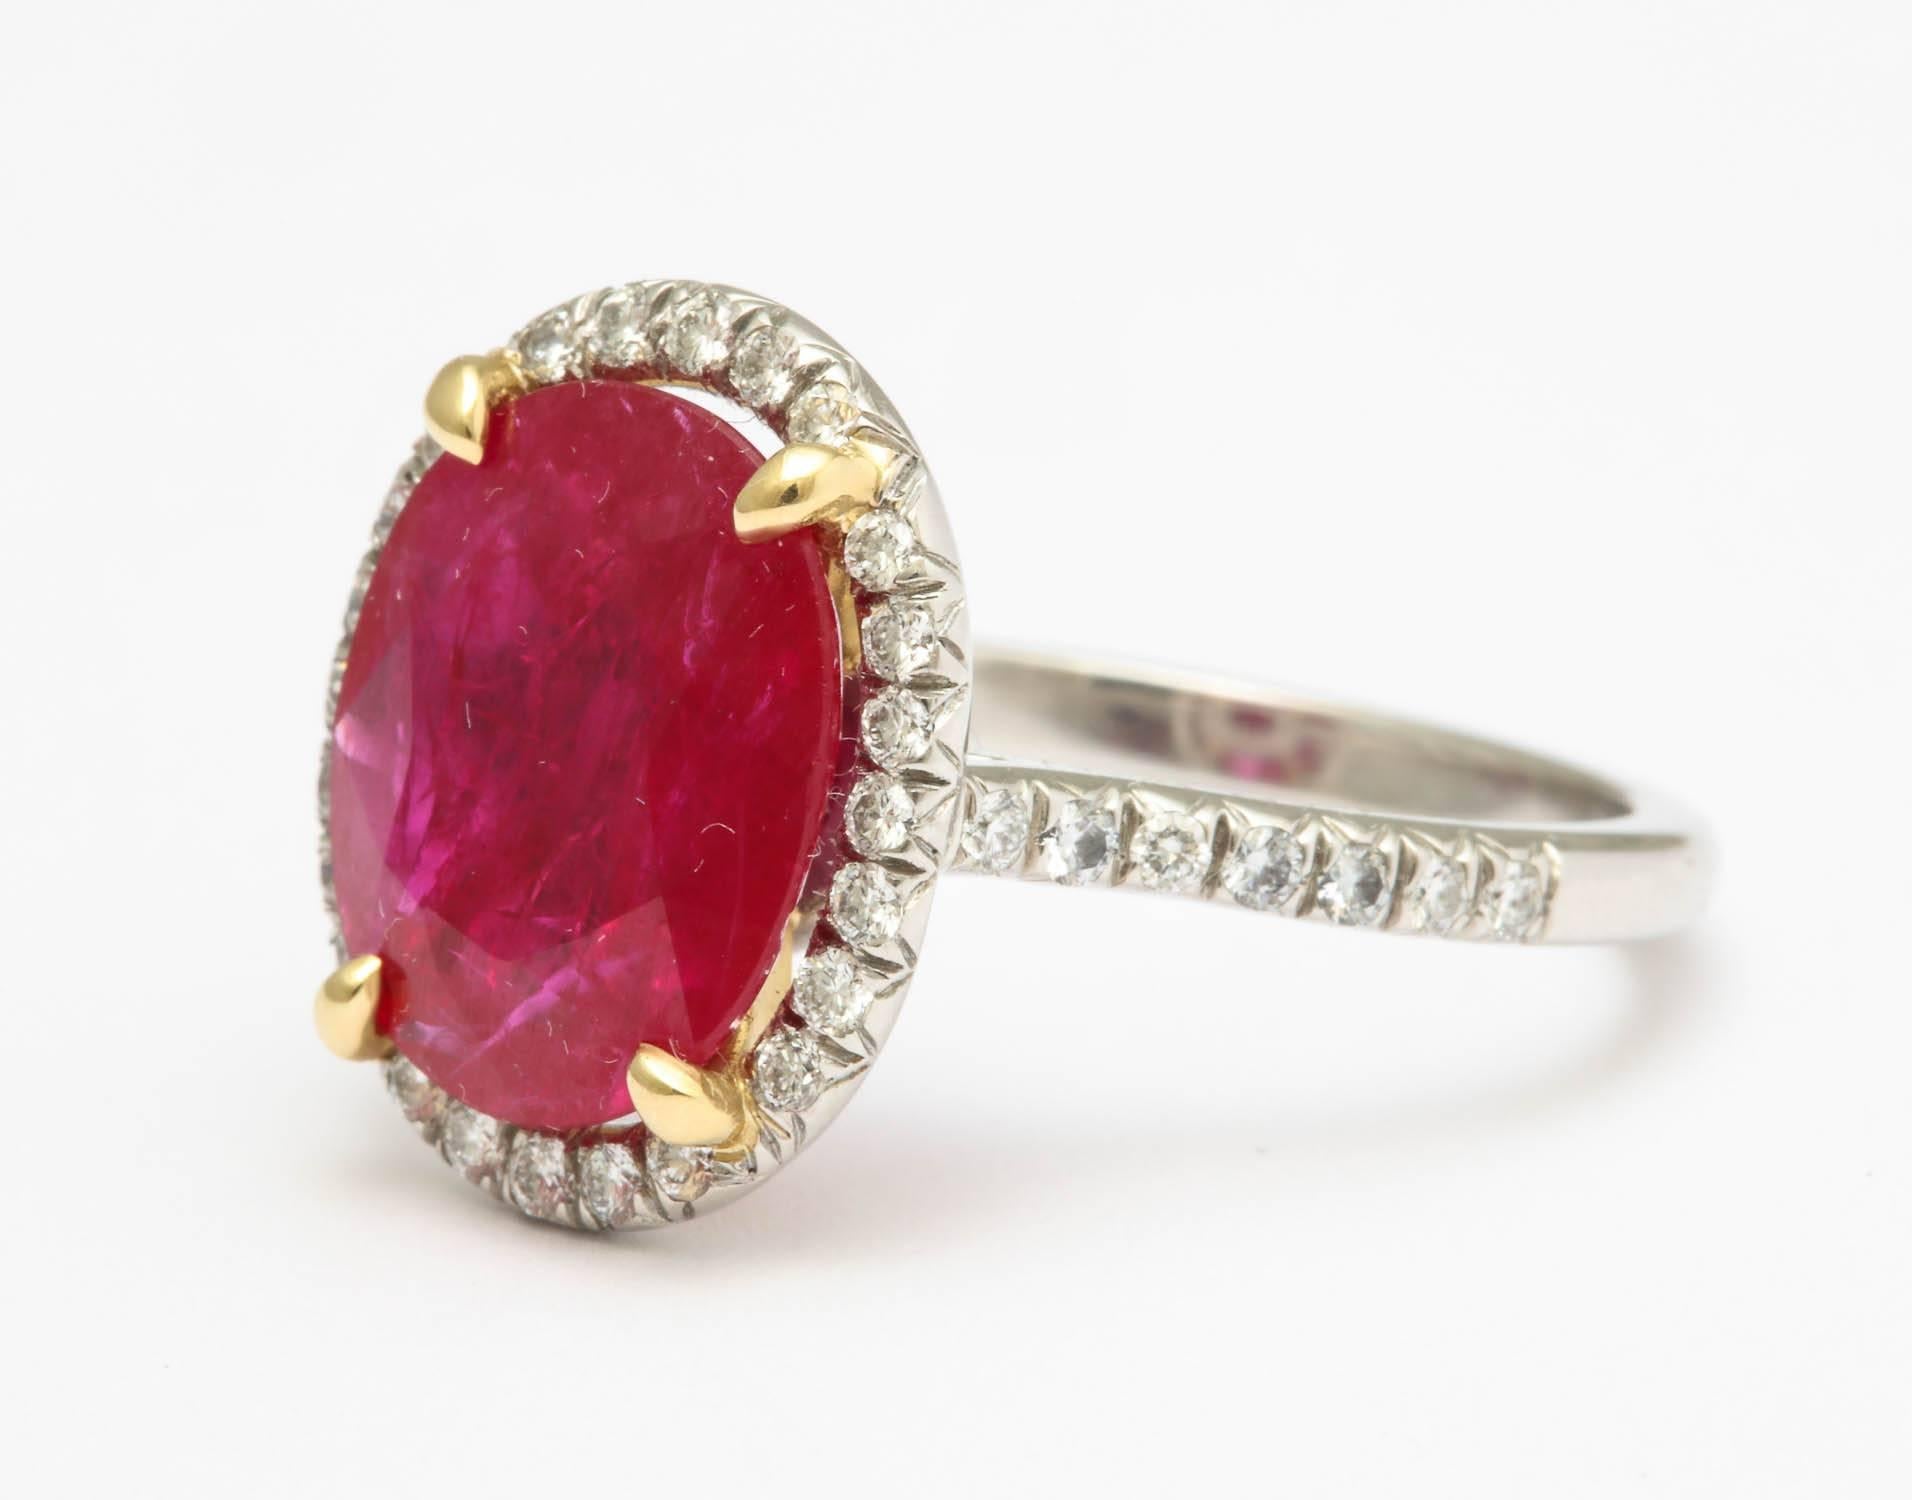 platinum wire setting centering an oval ruby 4.56
surrounded by 30 full cut diamonds 0.30 carats and flanked by 14 full cut diamonds 0.15 carats